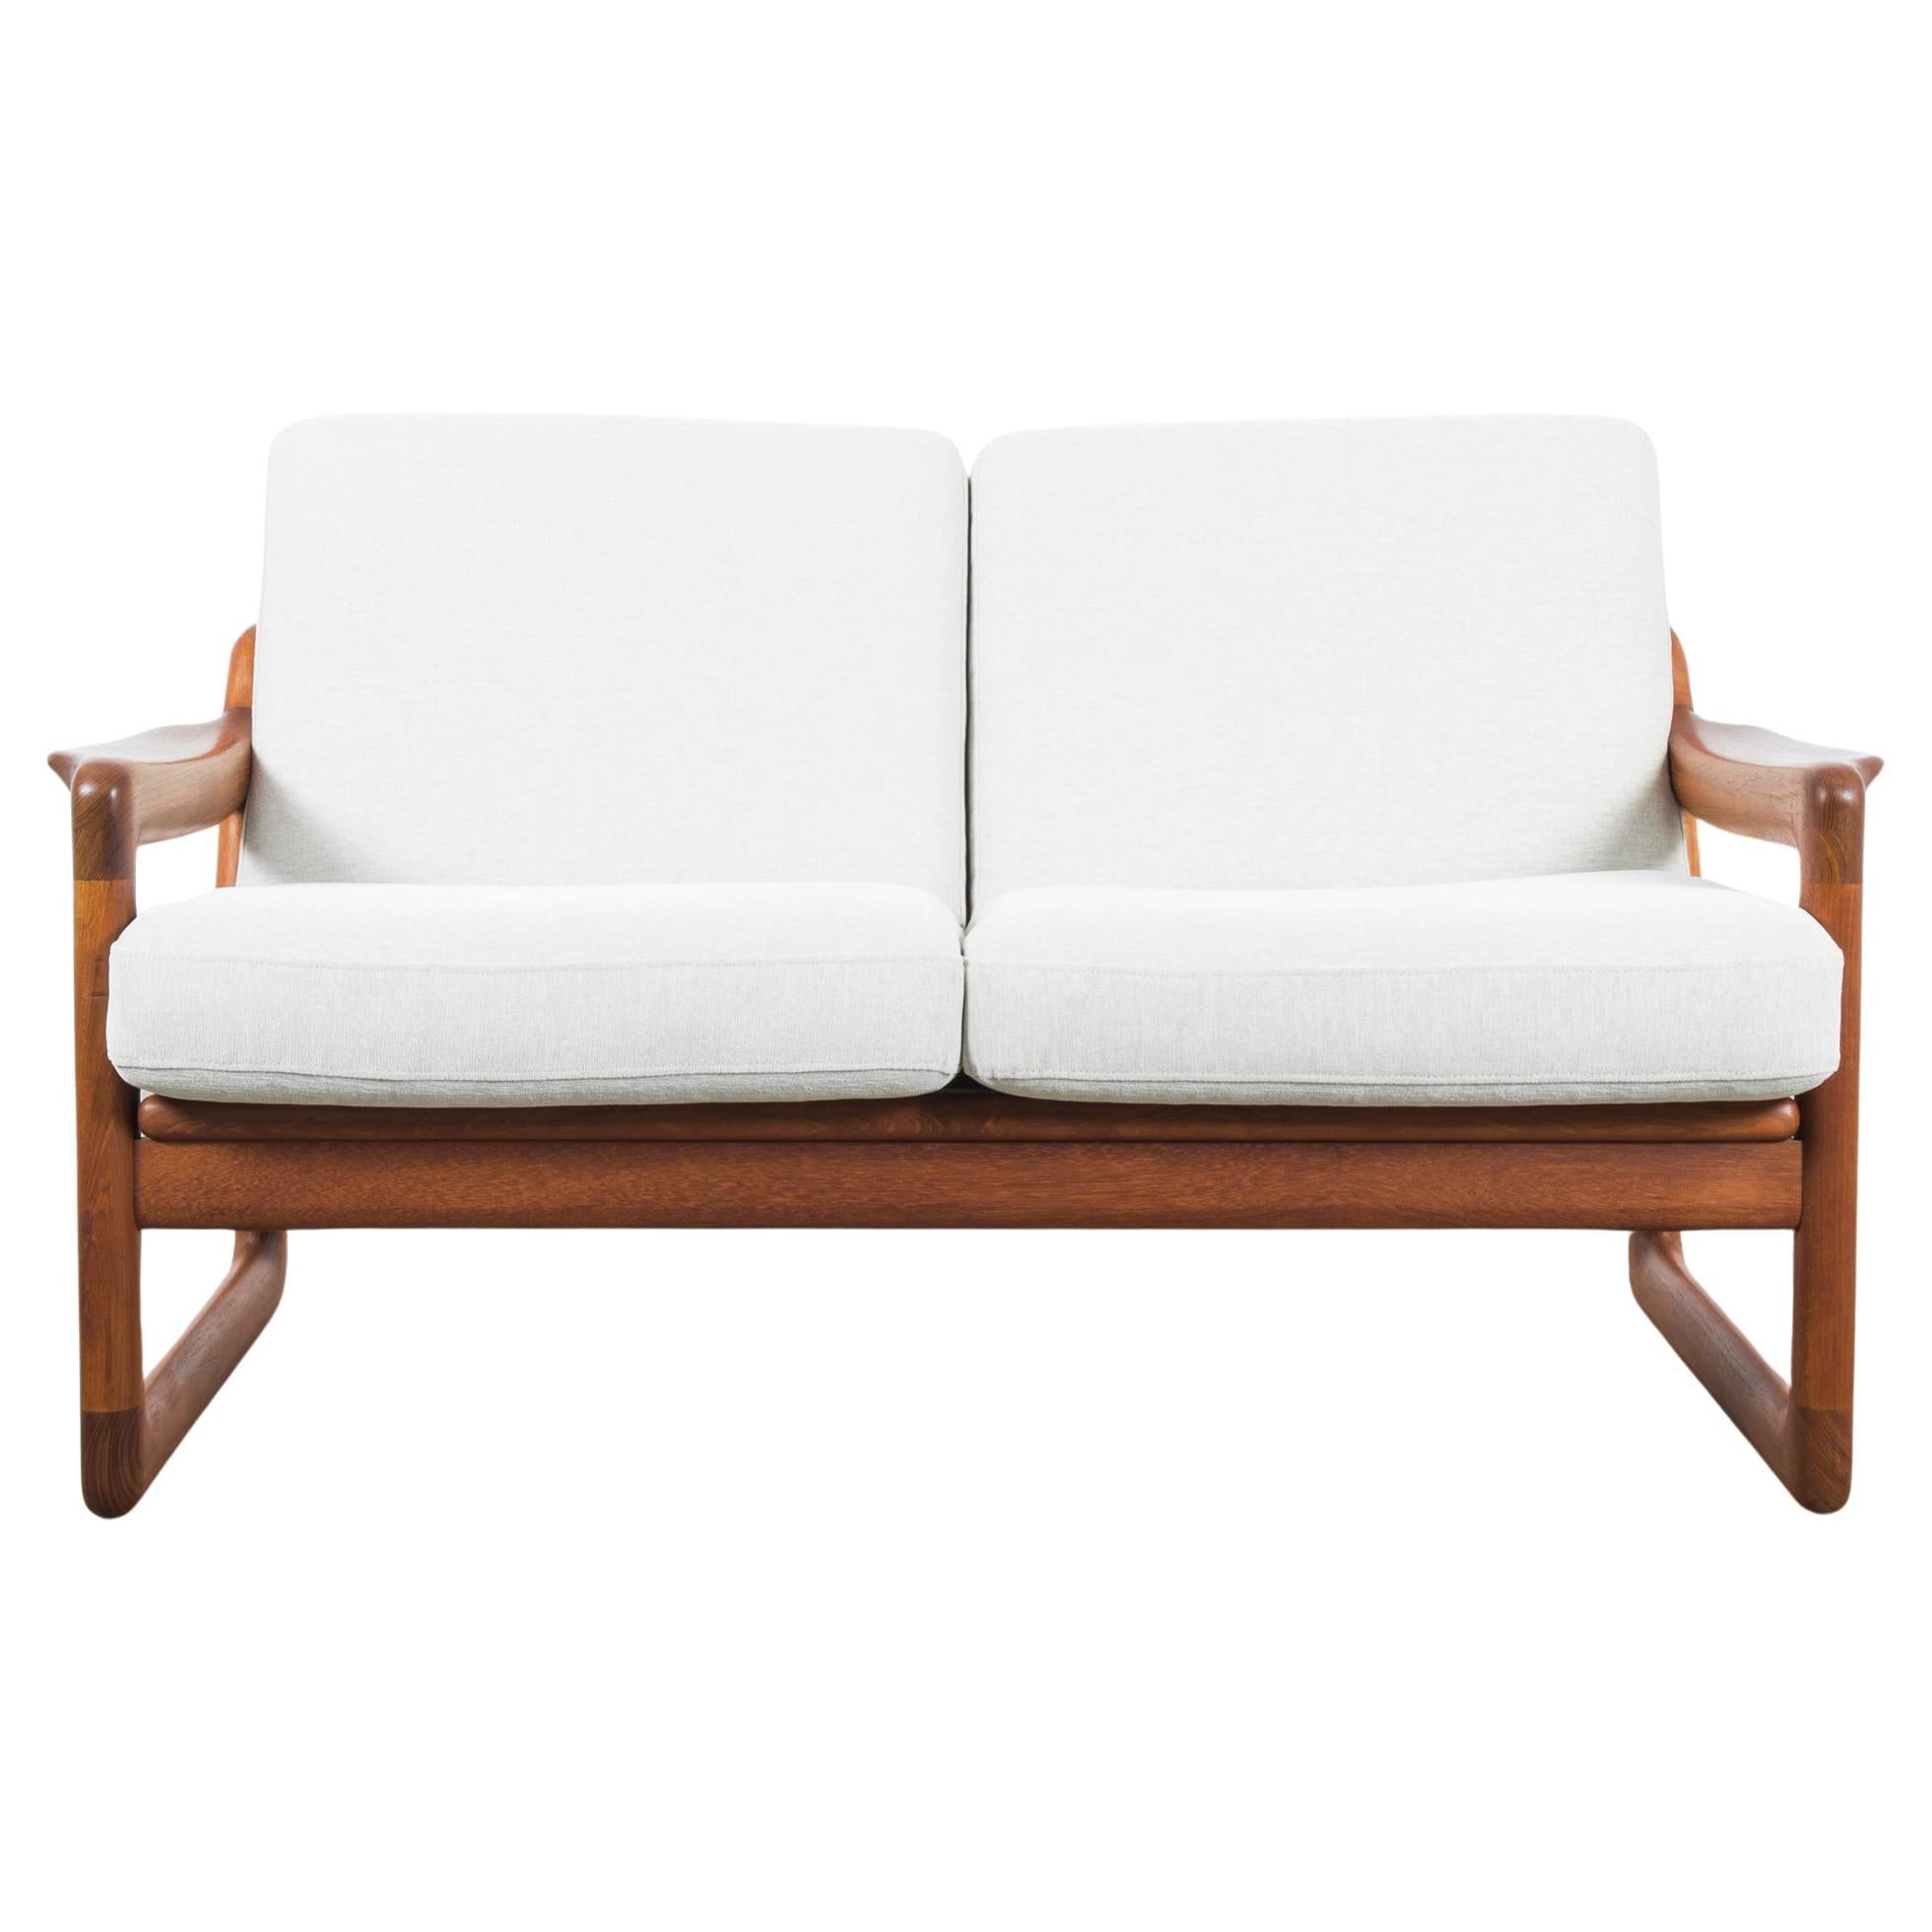 1960s Danish Retro Teak Sofa with Upholstered Seat and Back